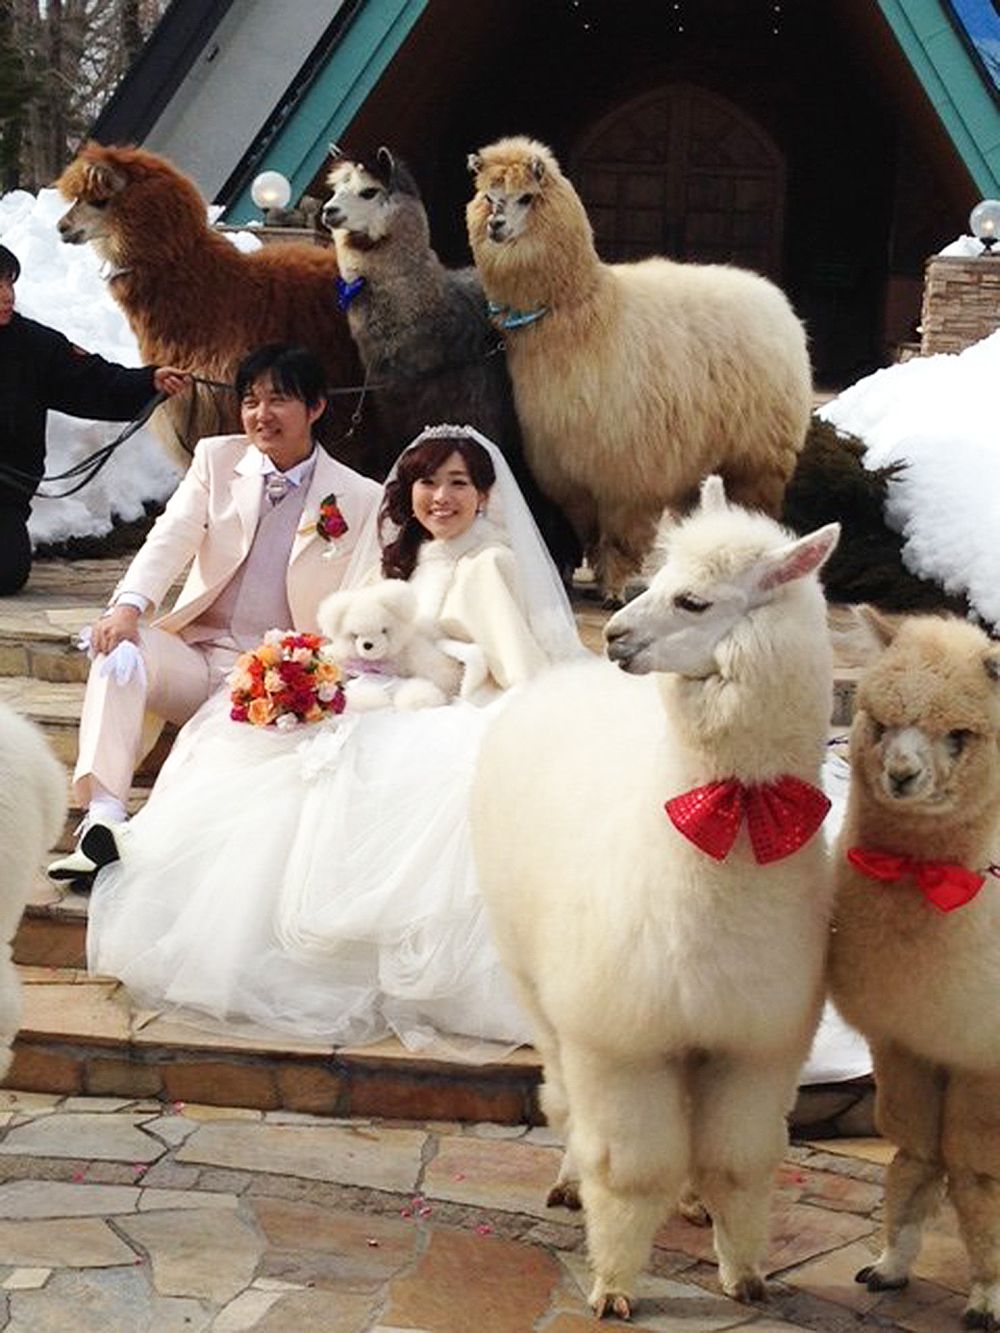 Haven T You Always Dreamed Of Having Alpacas At Your Wedding